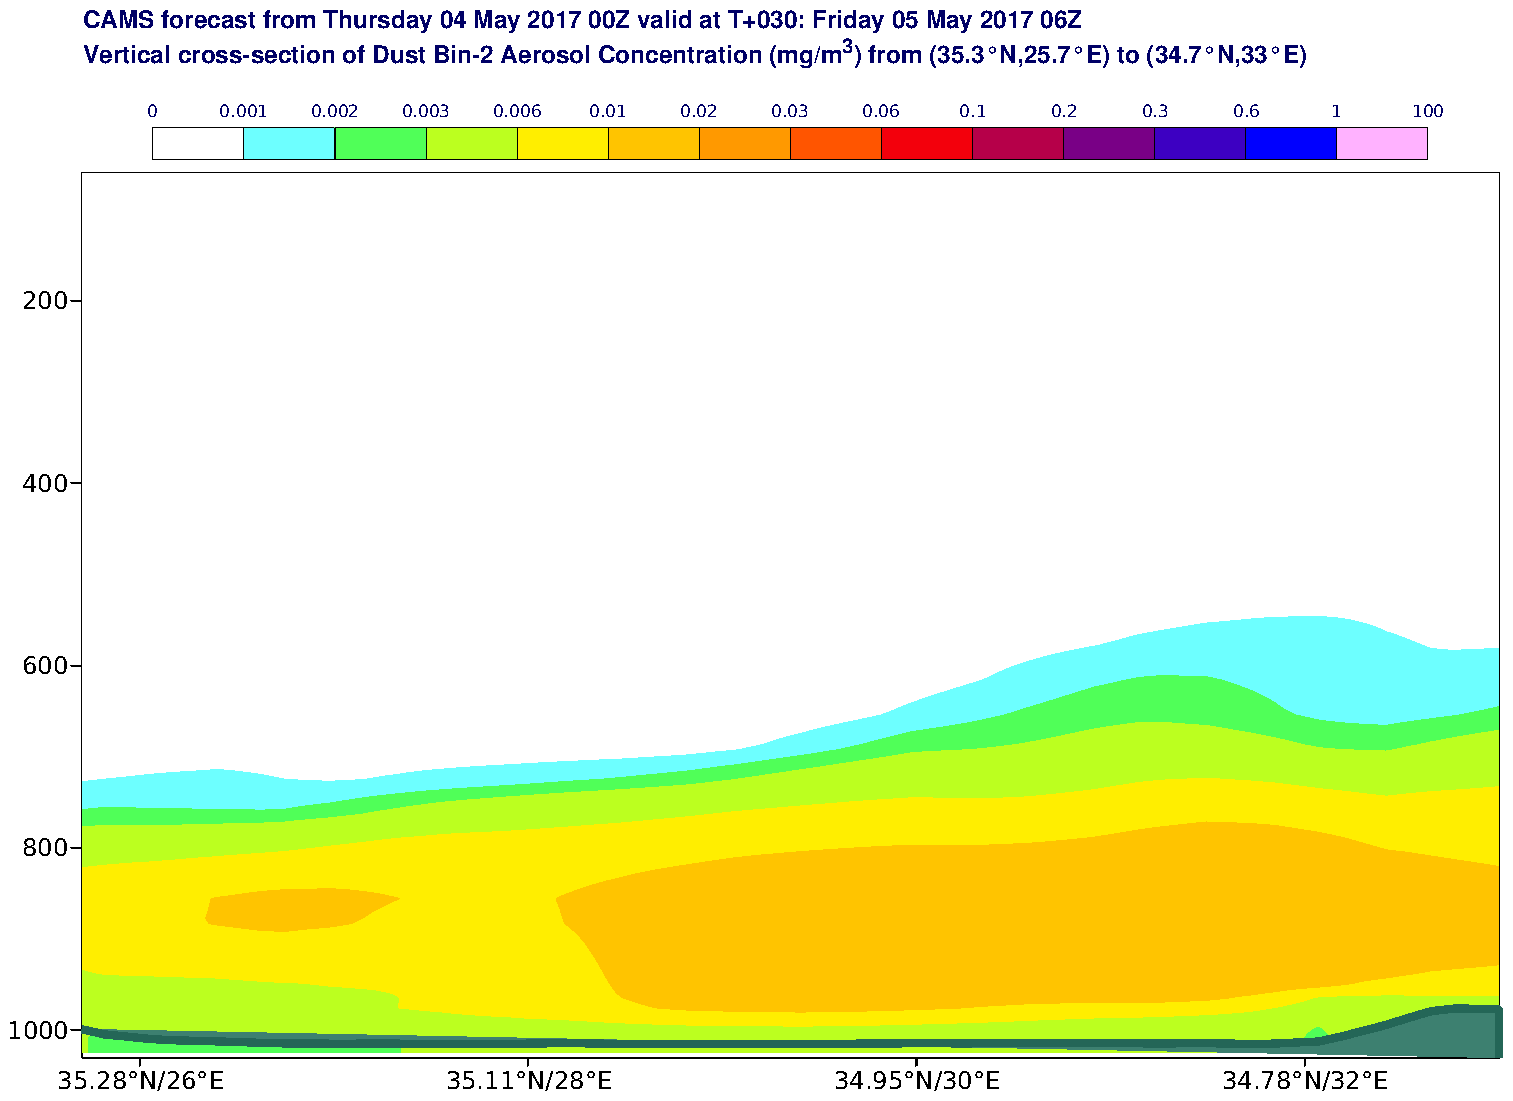 Vertical cross-section of Dust Bin-2 Aerosol Concentration (mg/m3) valid at T30 - 2017-05-05 06:00